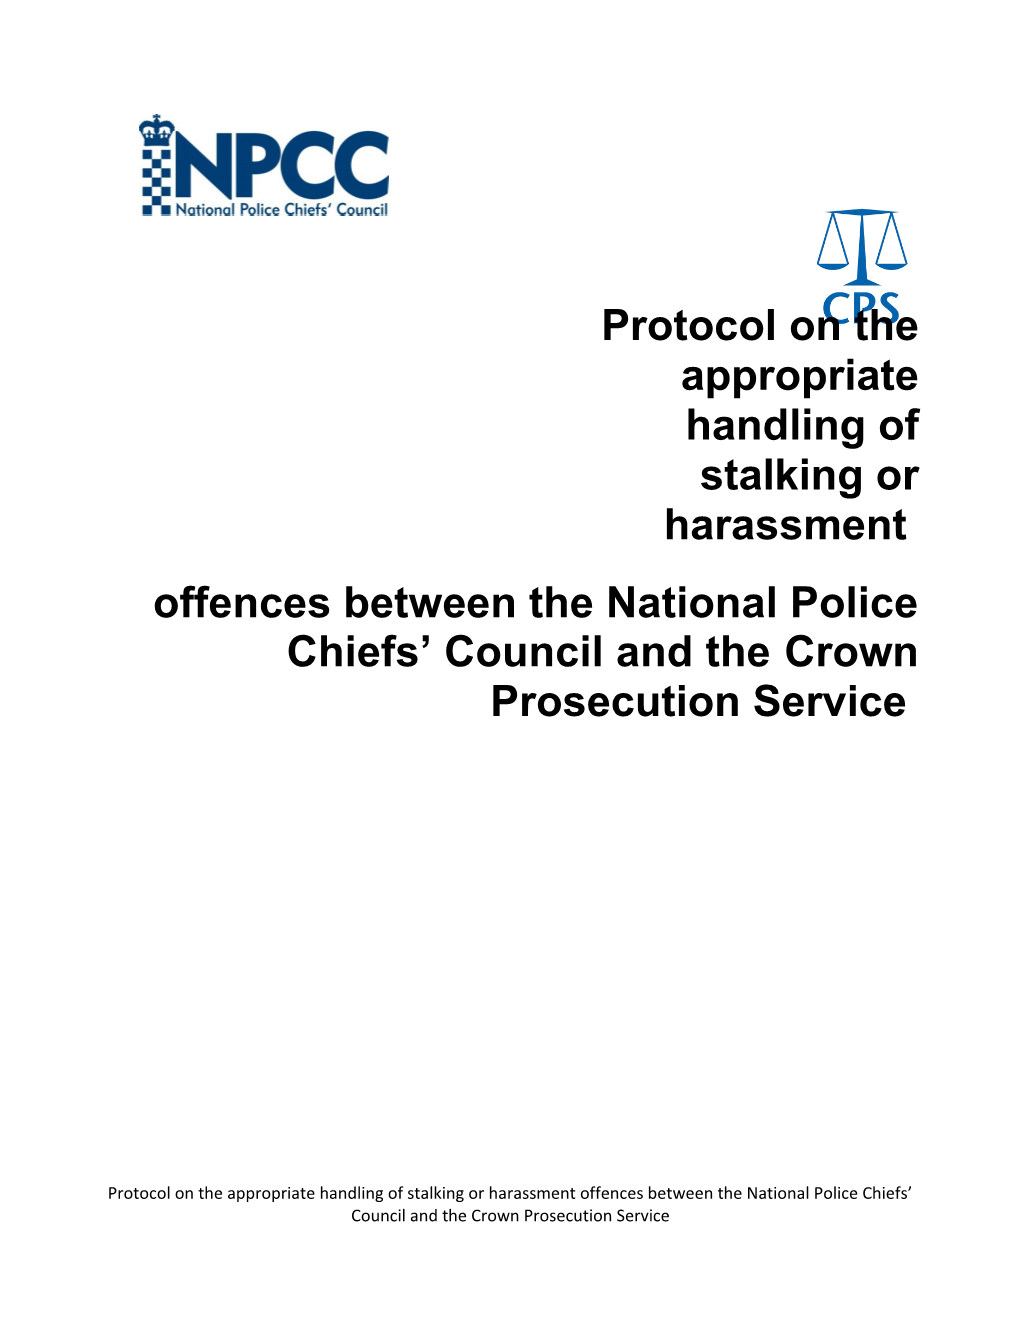 Protocol on the Appropriate Handling of Stalking Offences Between the Crown Prosecution